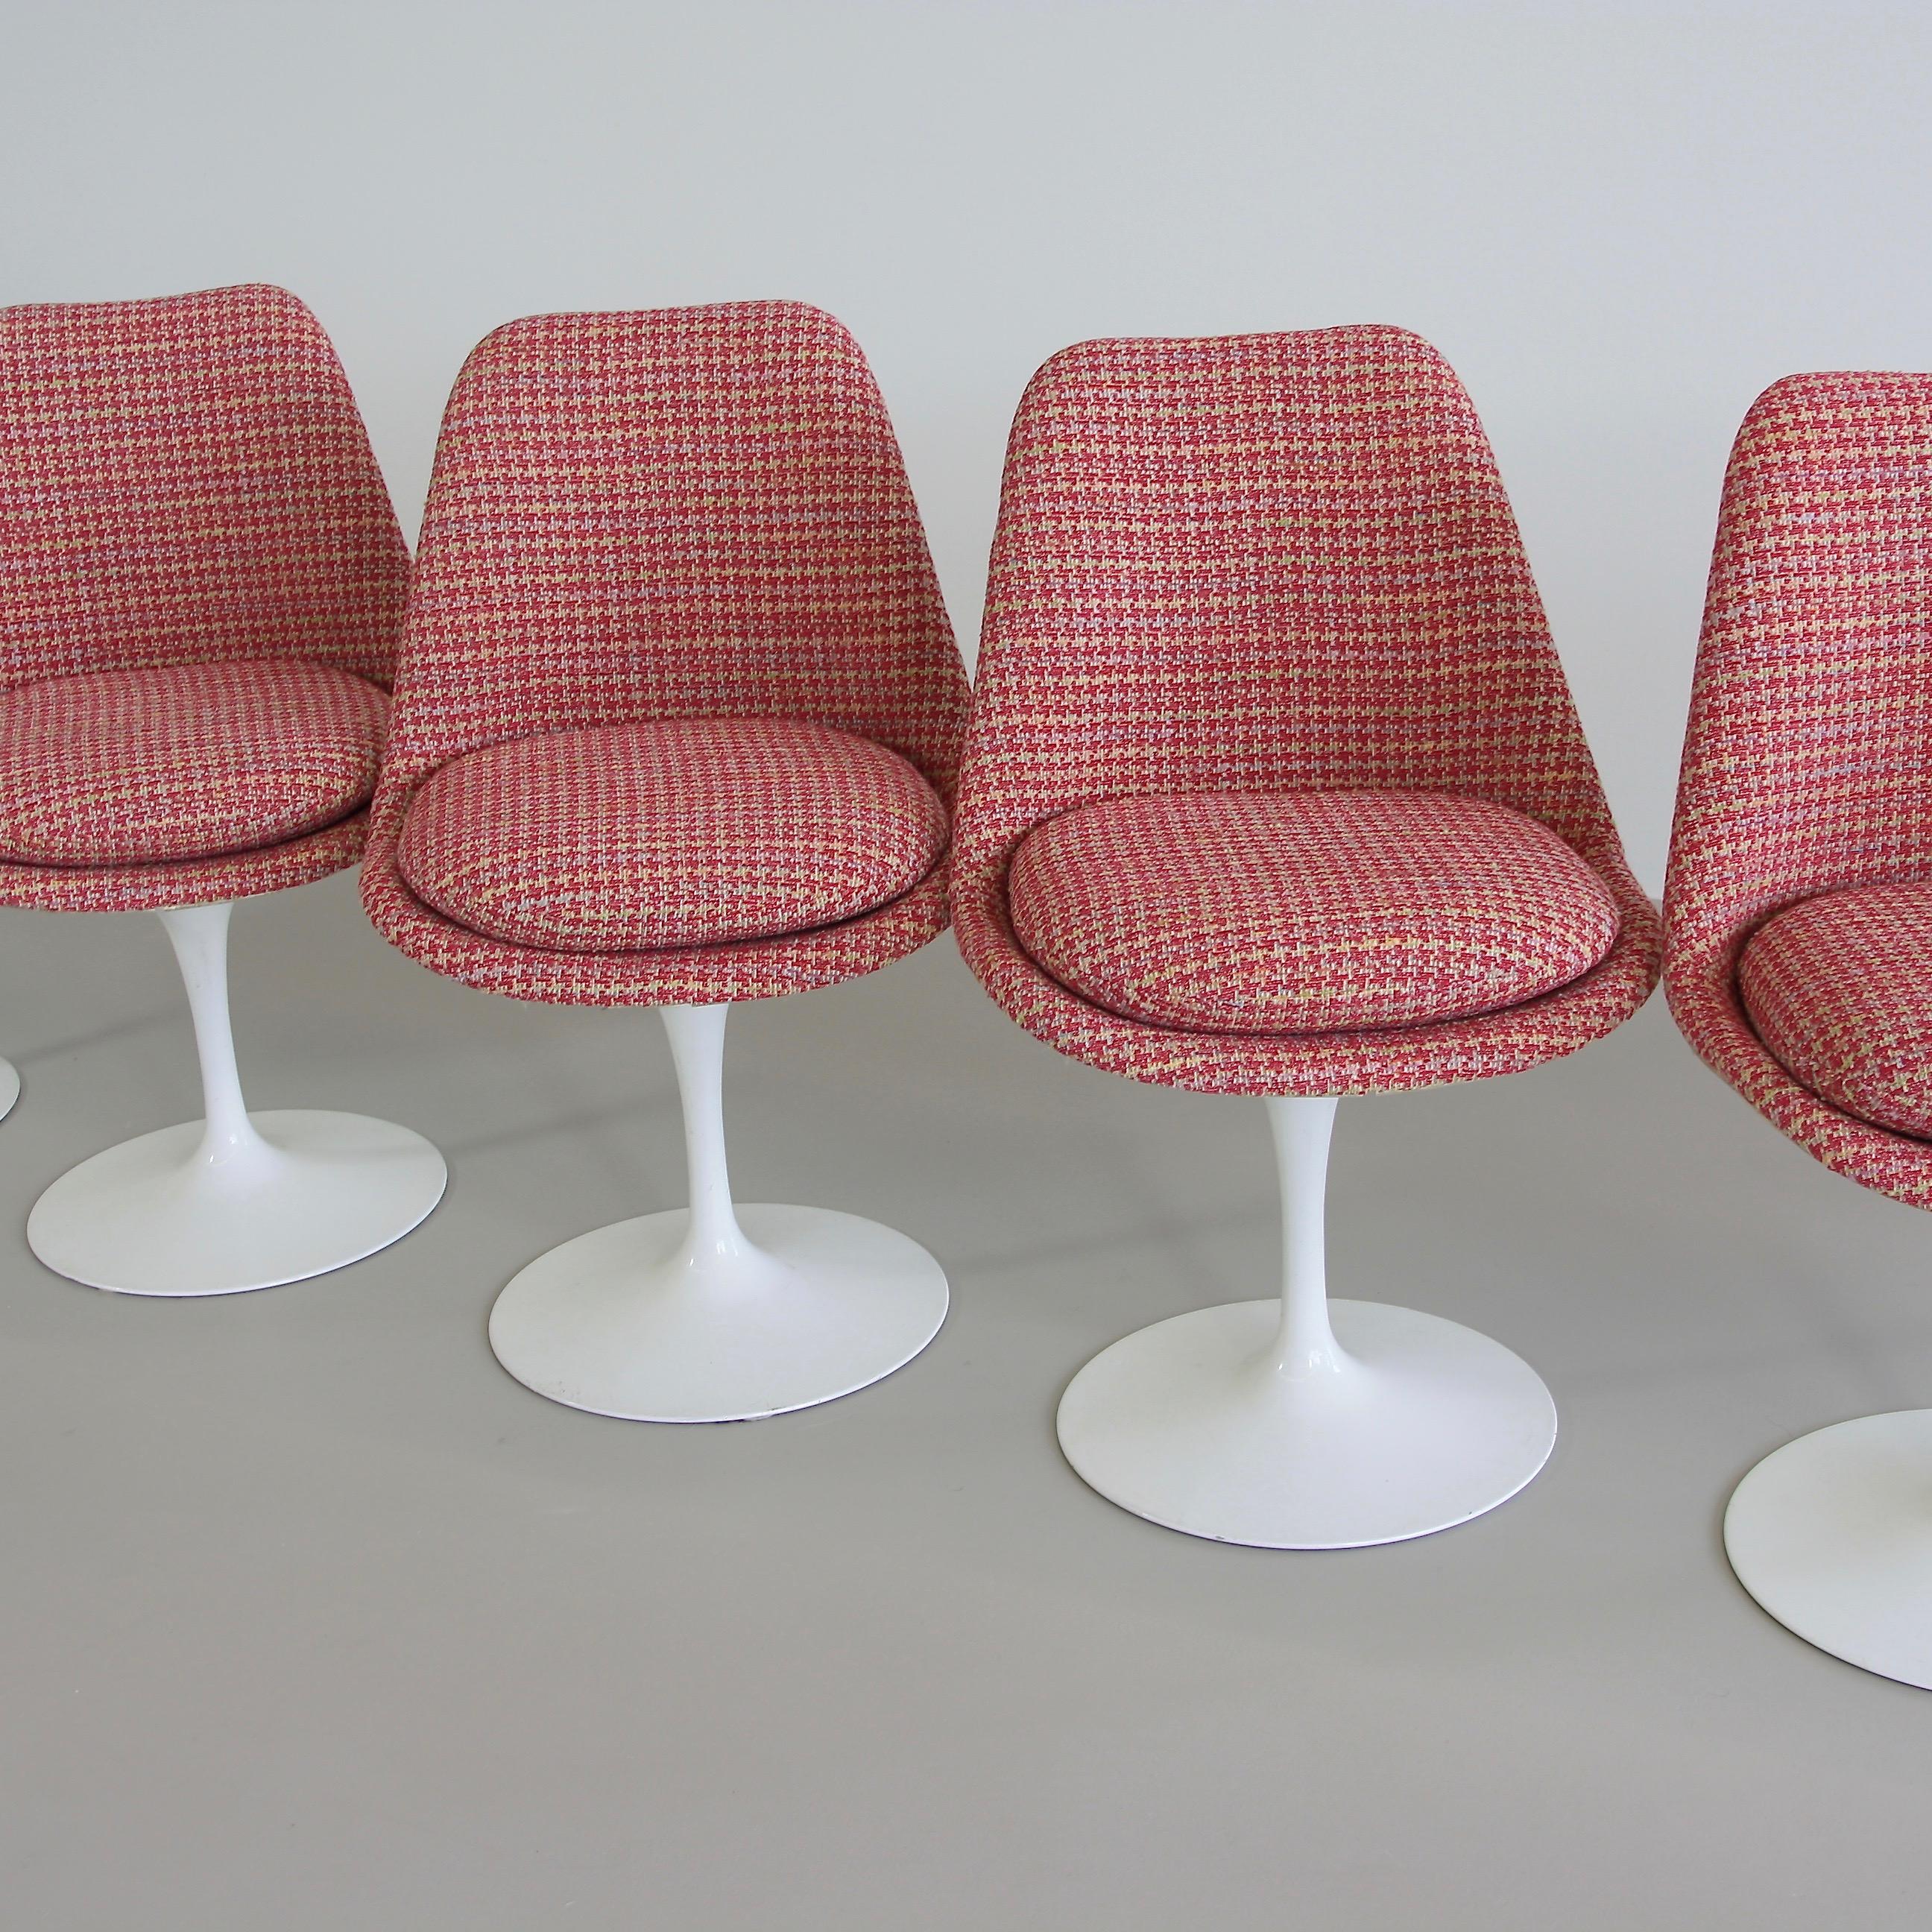 Set of 6 upholstered tulip chairs designed by Eero Saarinen, USA, Knoll International, 1957.

White cast aluminum tulip bases with (five) swiveling seats. Early original chairs with 'Knoll International' logo underside of the base. Seat and back